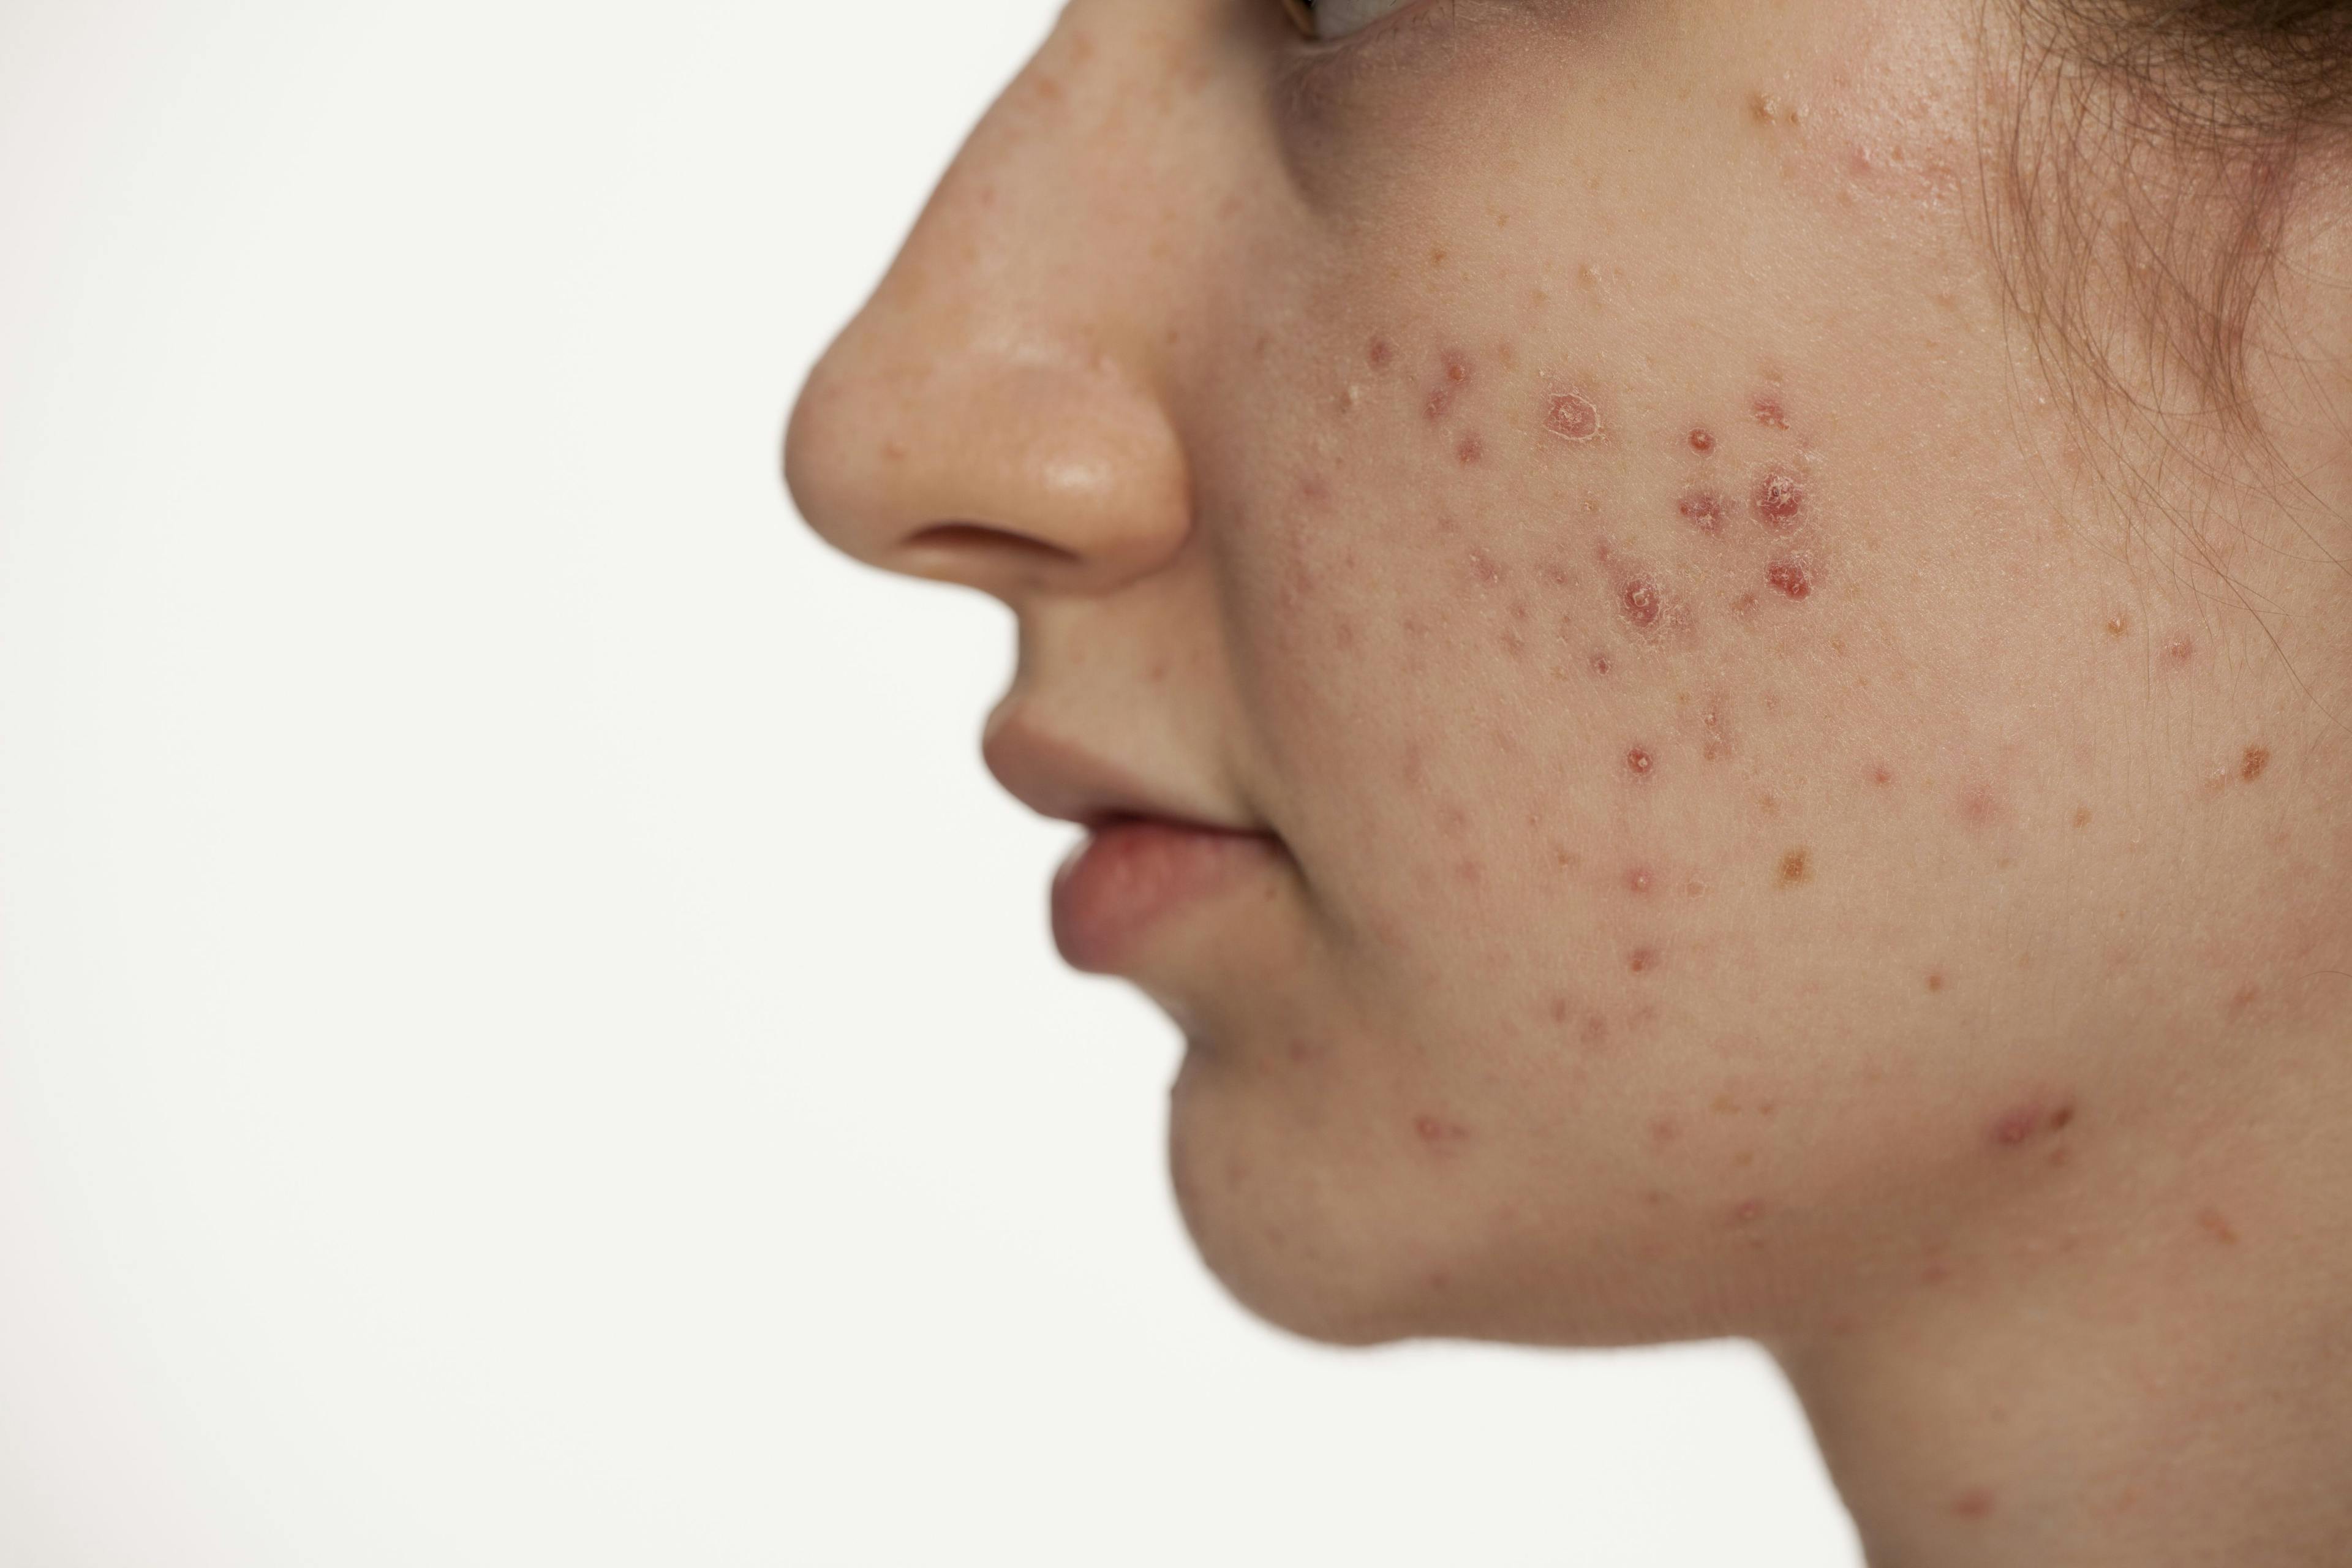 Join Dermatology Times® in Discussing Childhood Acne